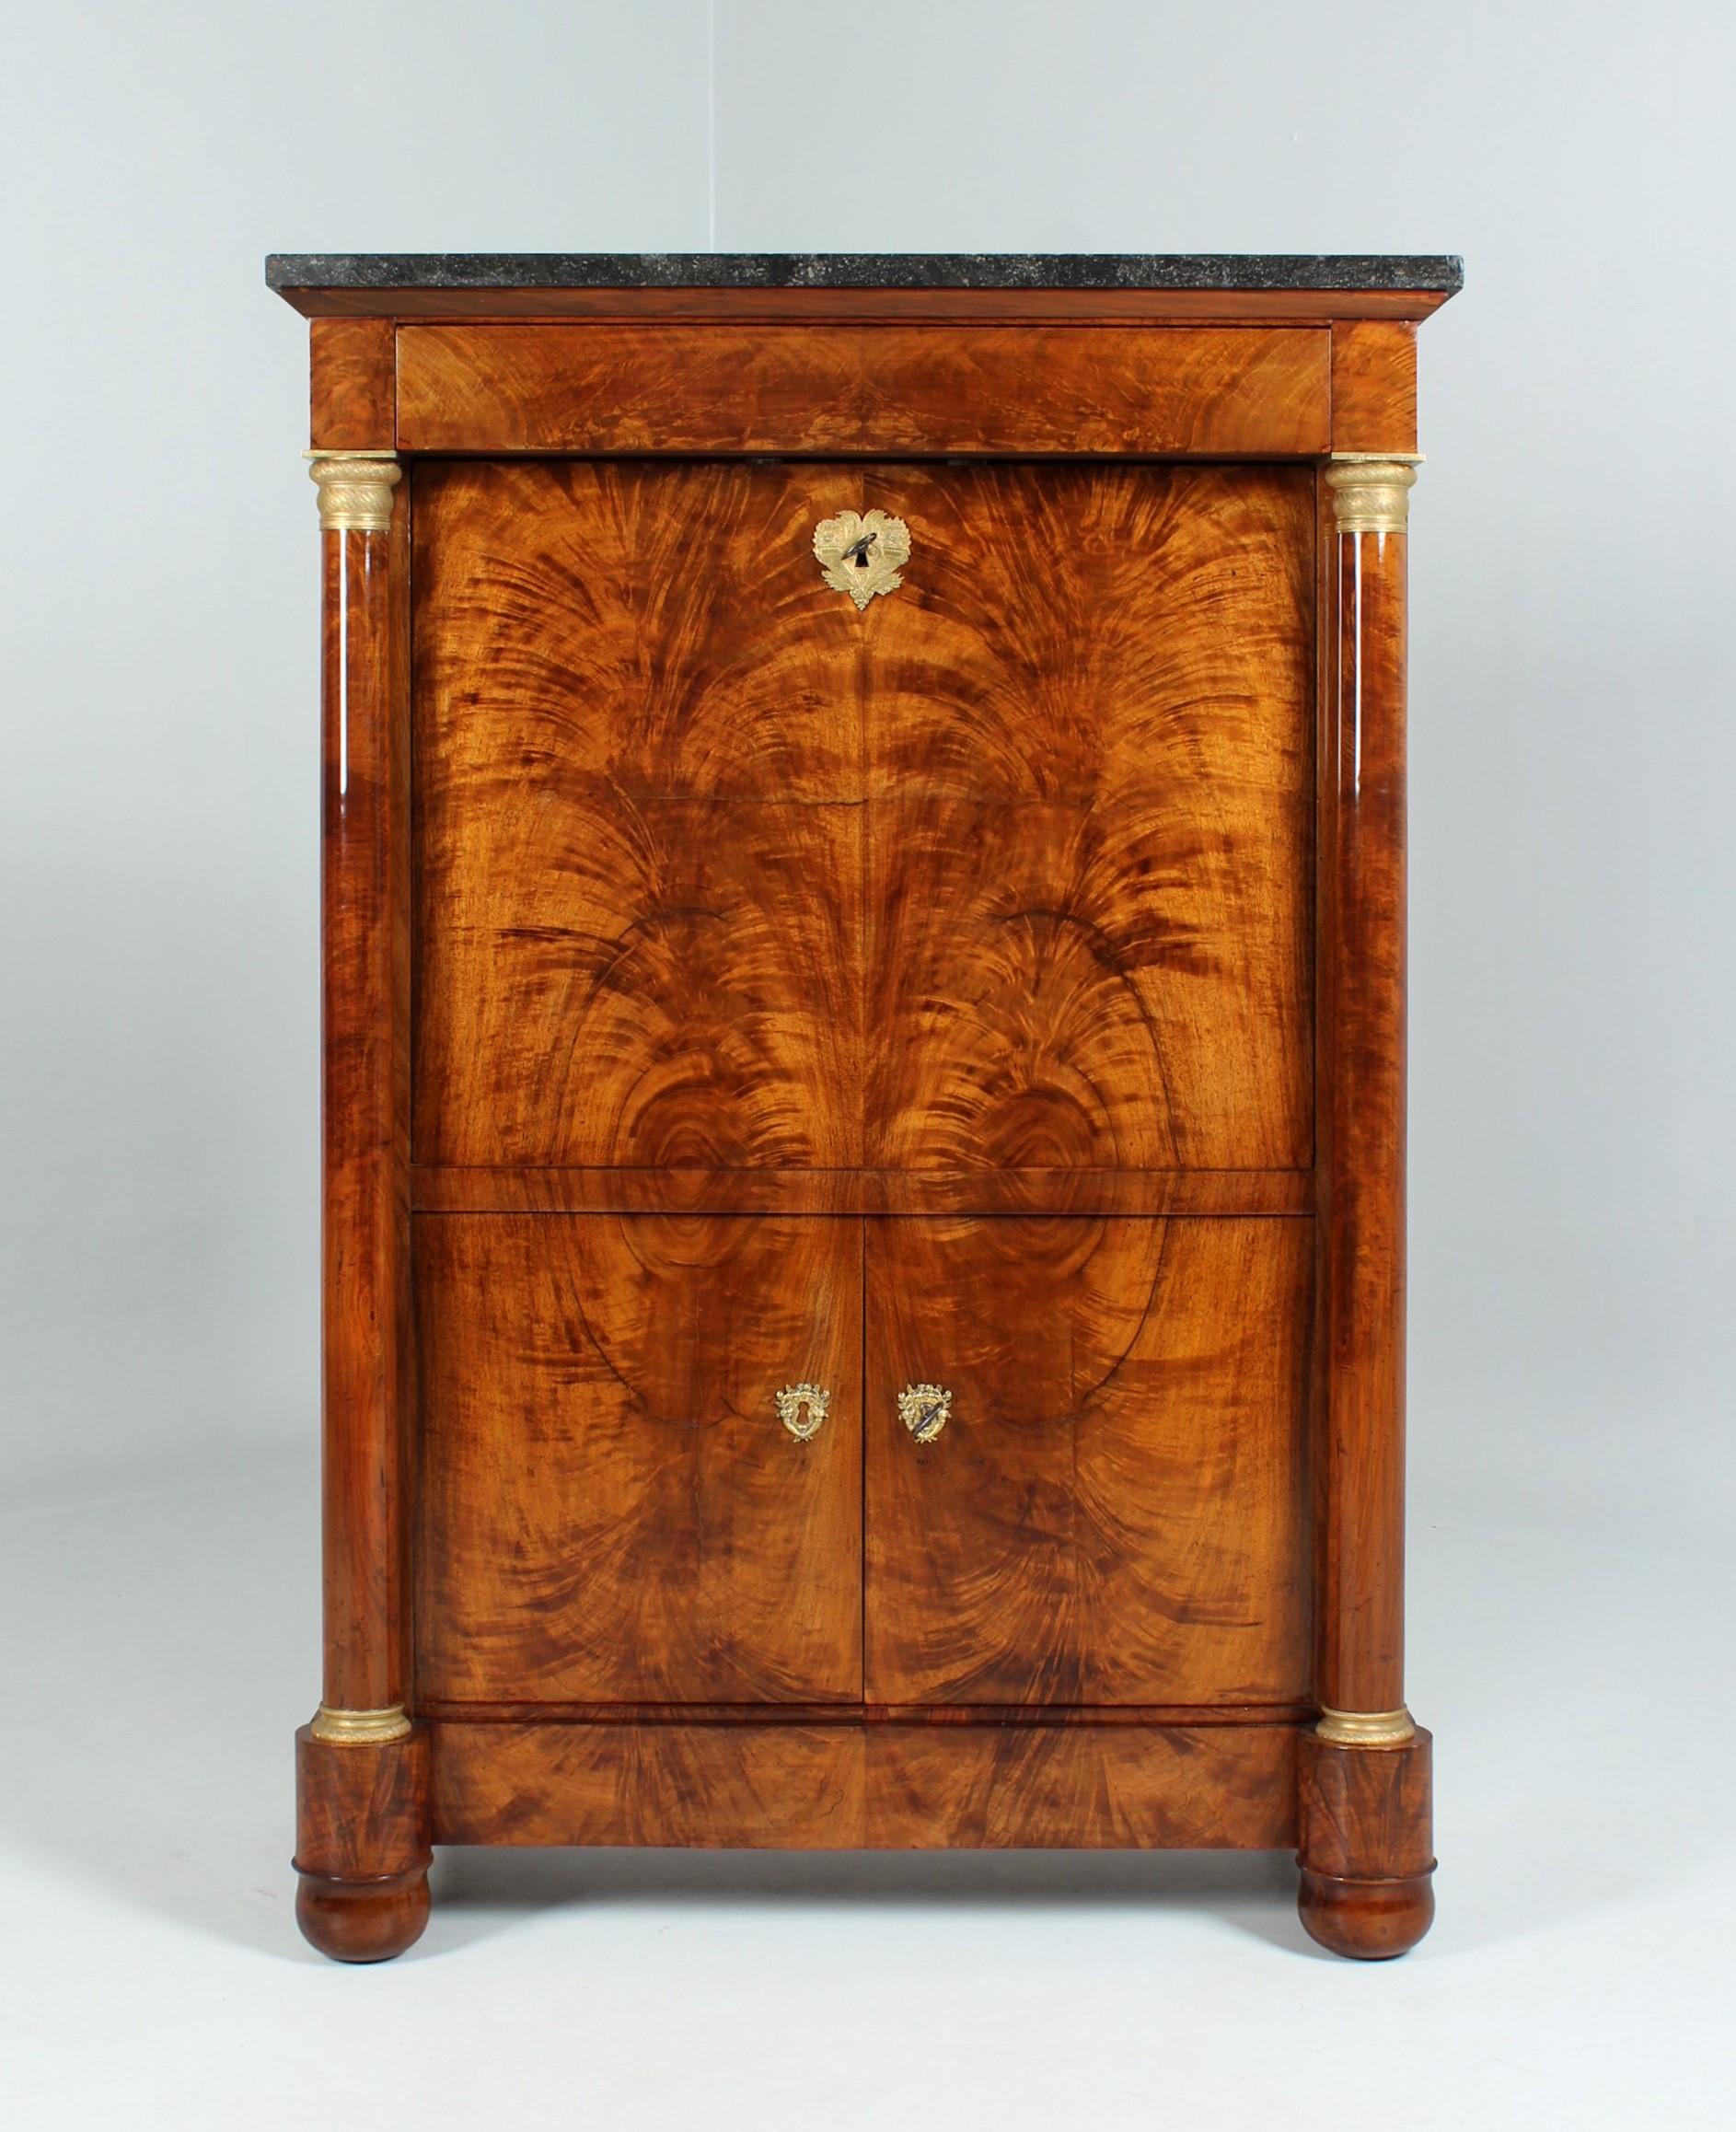 Antique Empire Secretary

France
Walnut
Empire around 1820

Dimensions: H x W x D: 143 x 98 x 49 cm

Description:
Very fine French writing desk with delicate dimensions. The above dimensions are measured at the marble top, the width of the body is